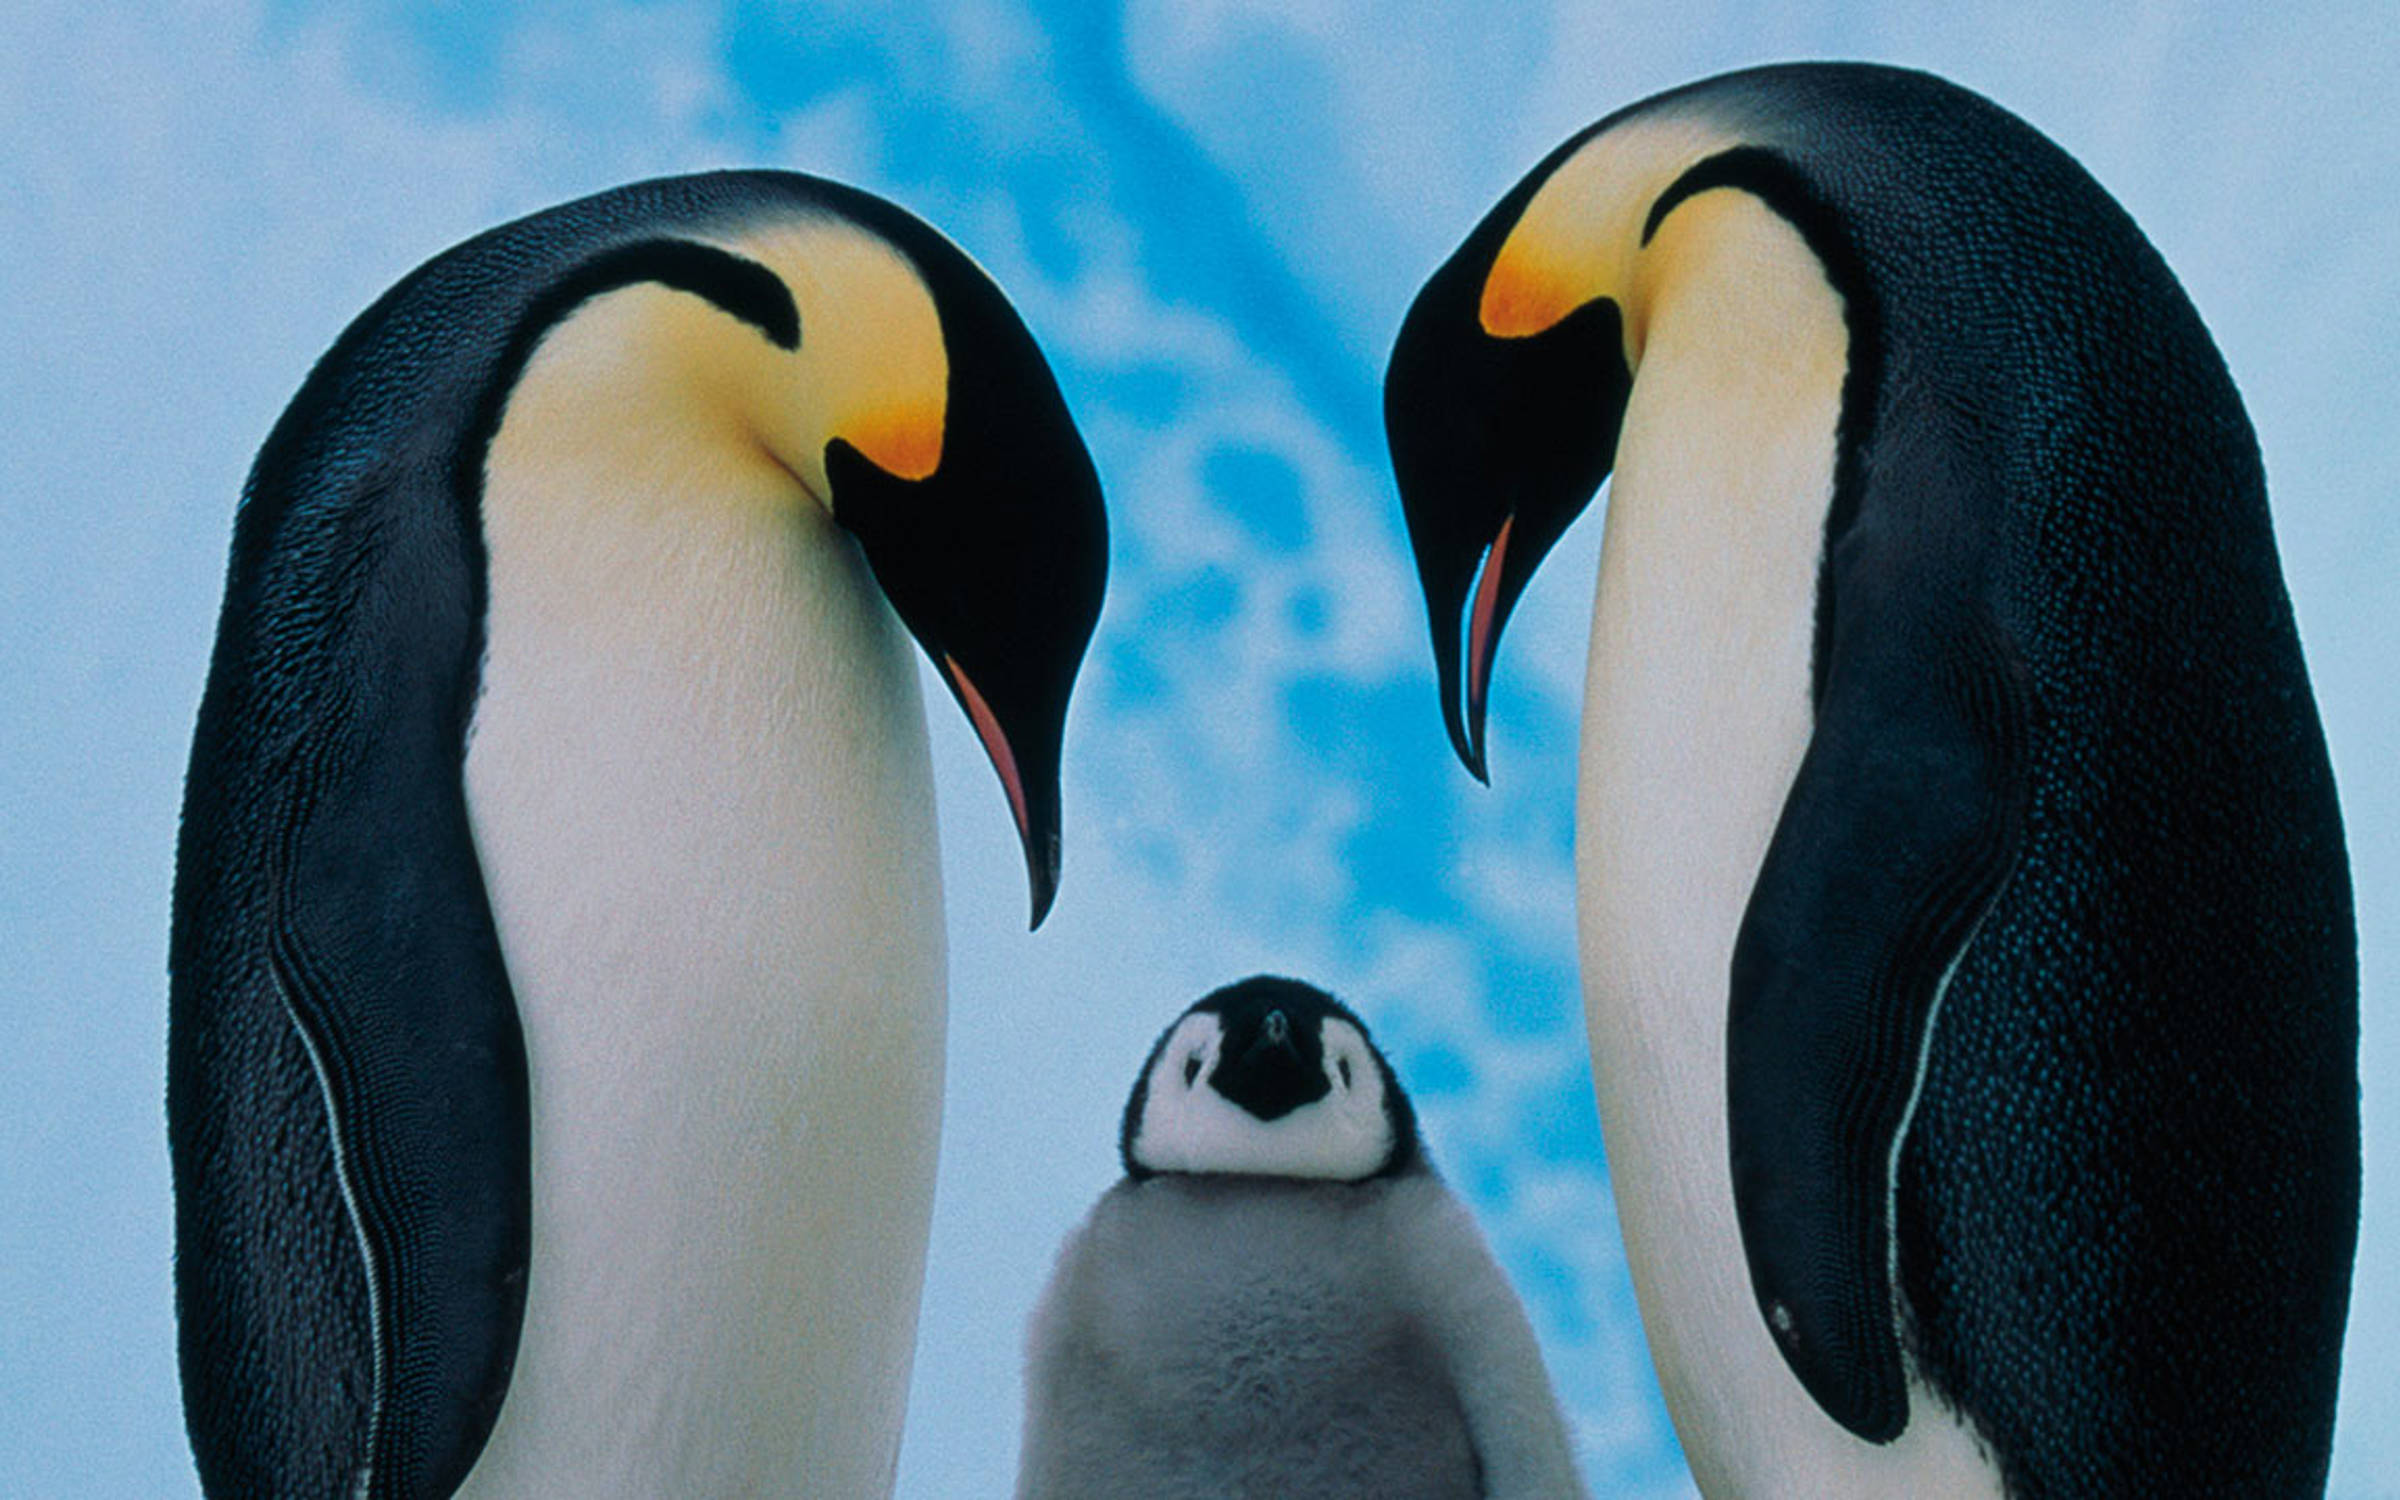 Care - Penguin parents looking over their child.